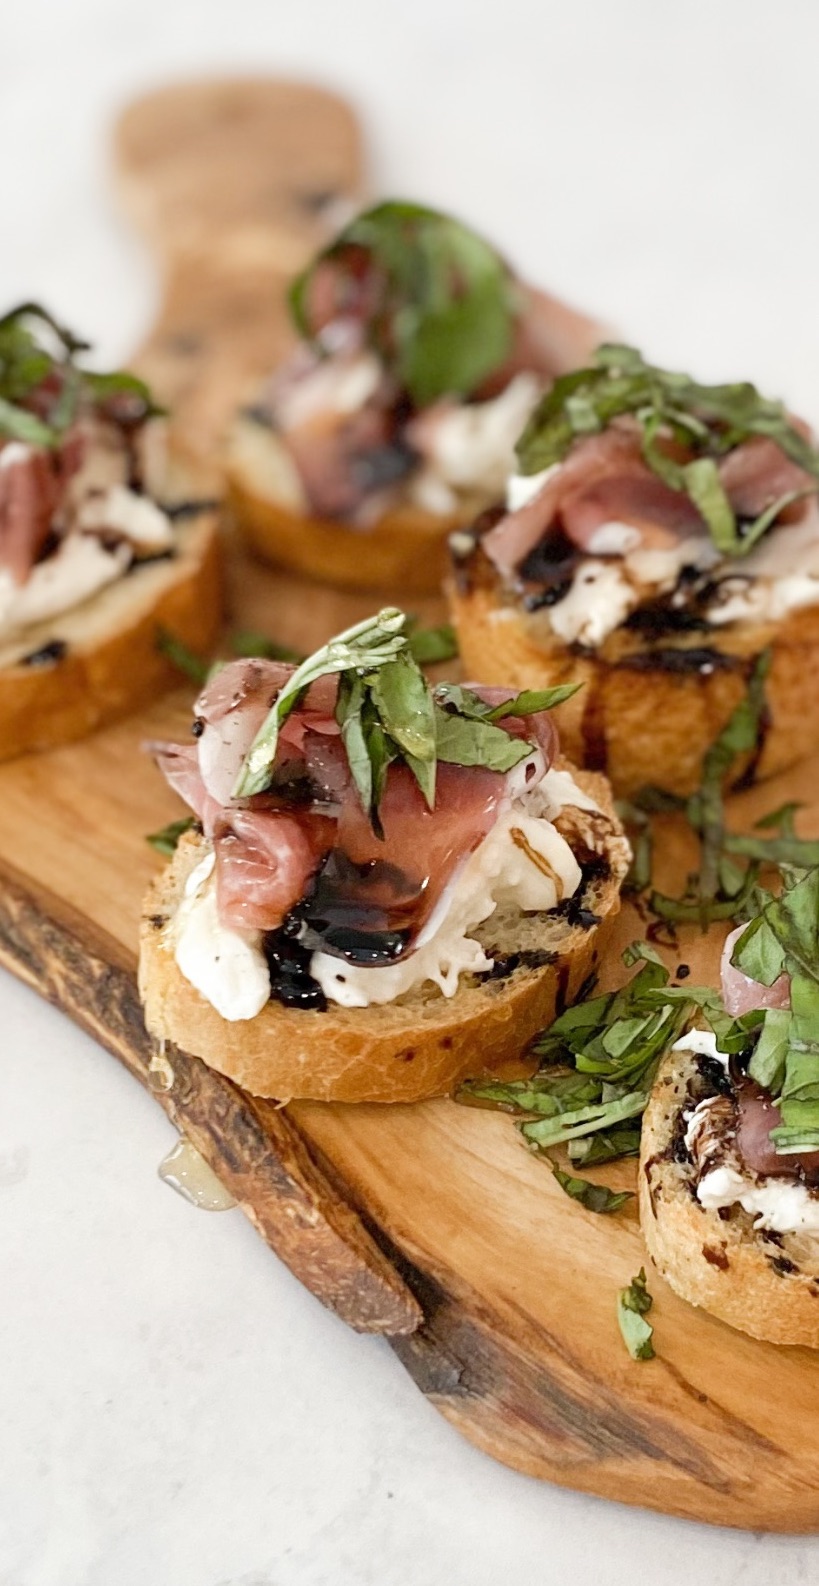 Five prosciutto crostinis in image with one in clear focus. 5 mini crostinis with baked toast, burrata, prosciutto, basil, honey and balsamic drizzle.